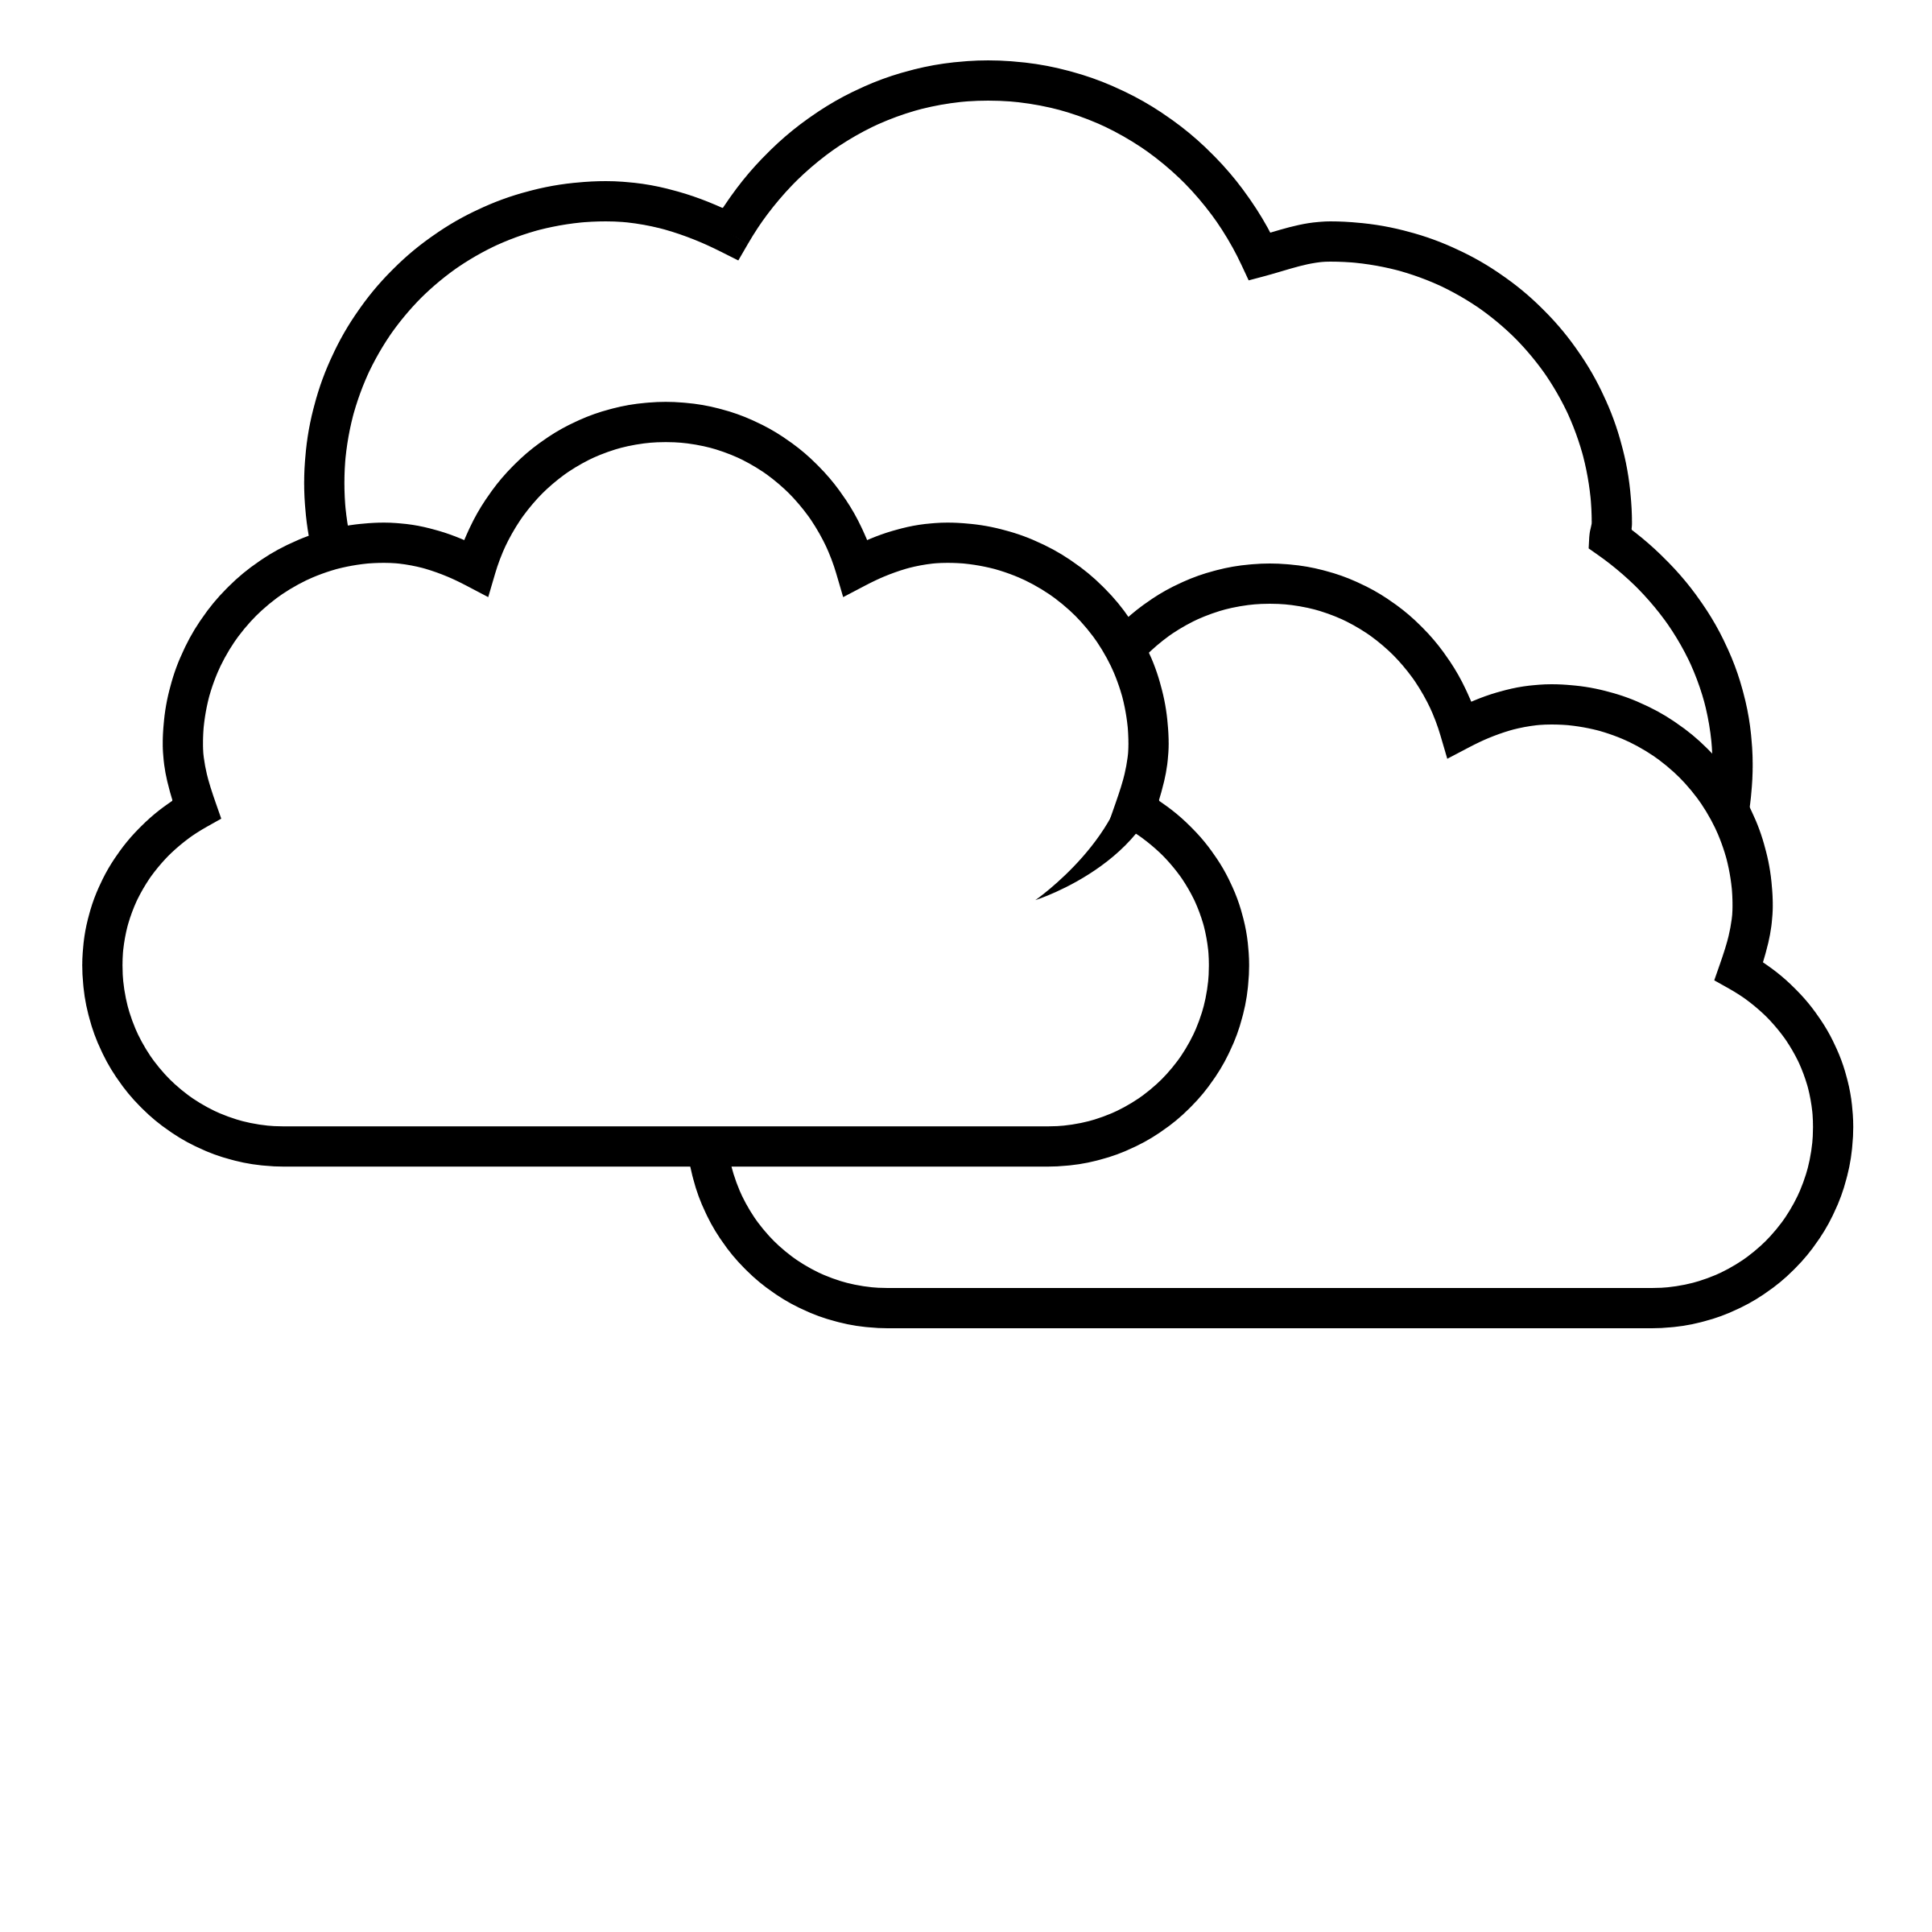 partly cloudy clipart black a - Cloudy Clipart